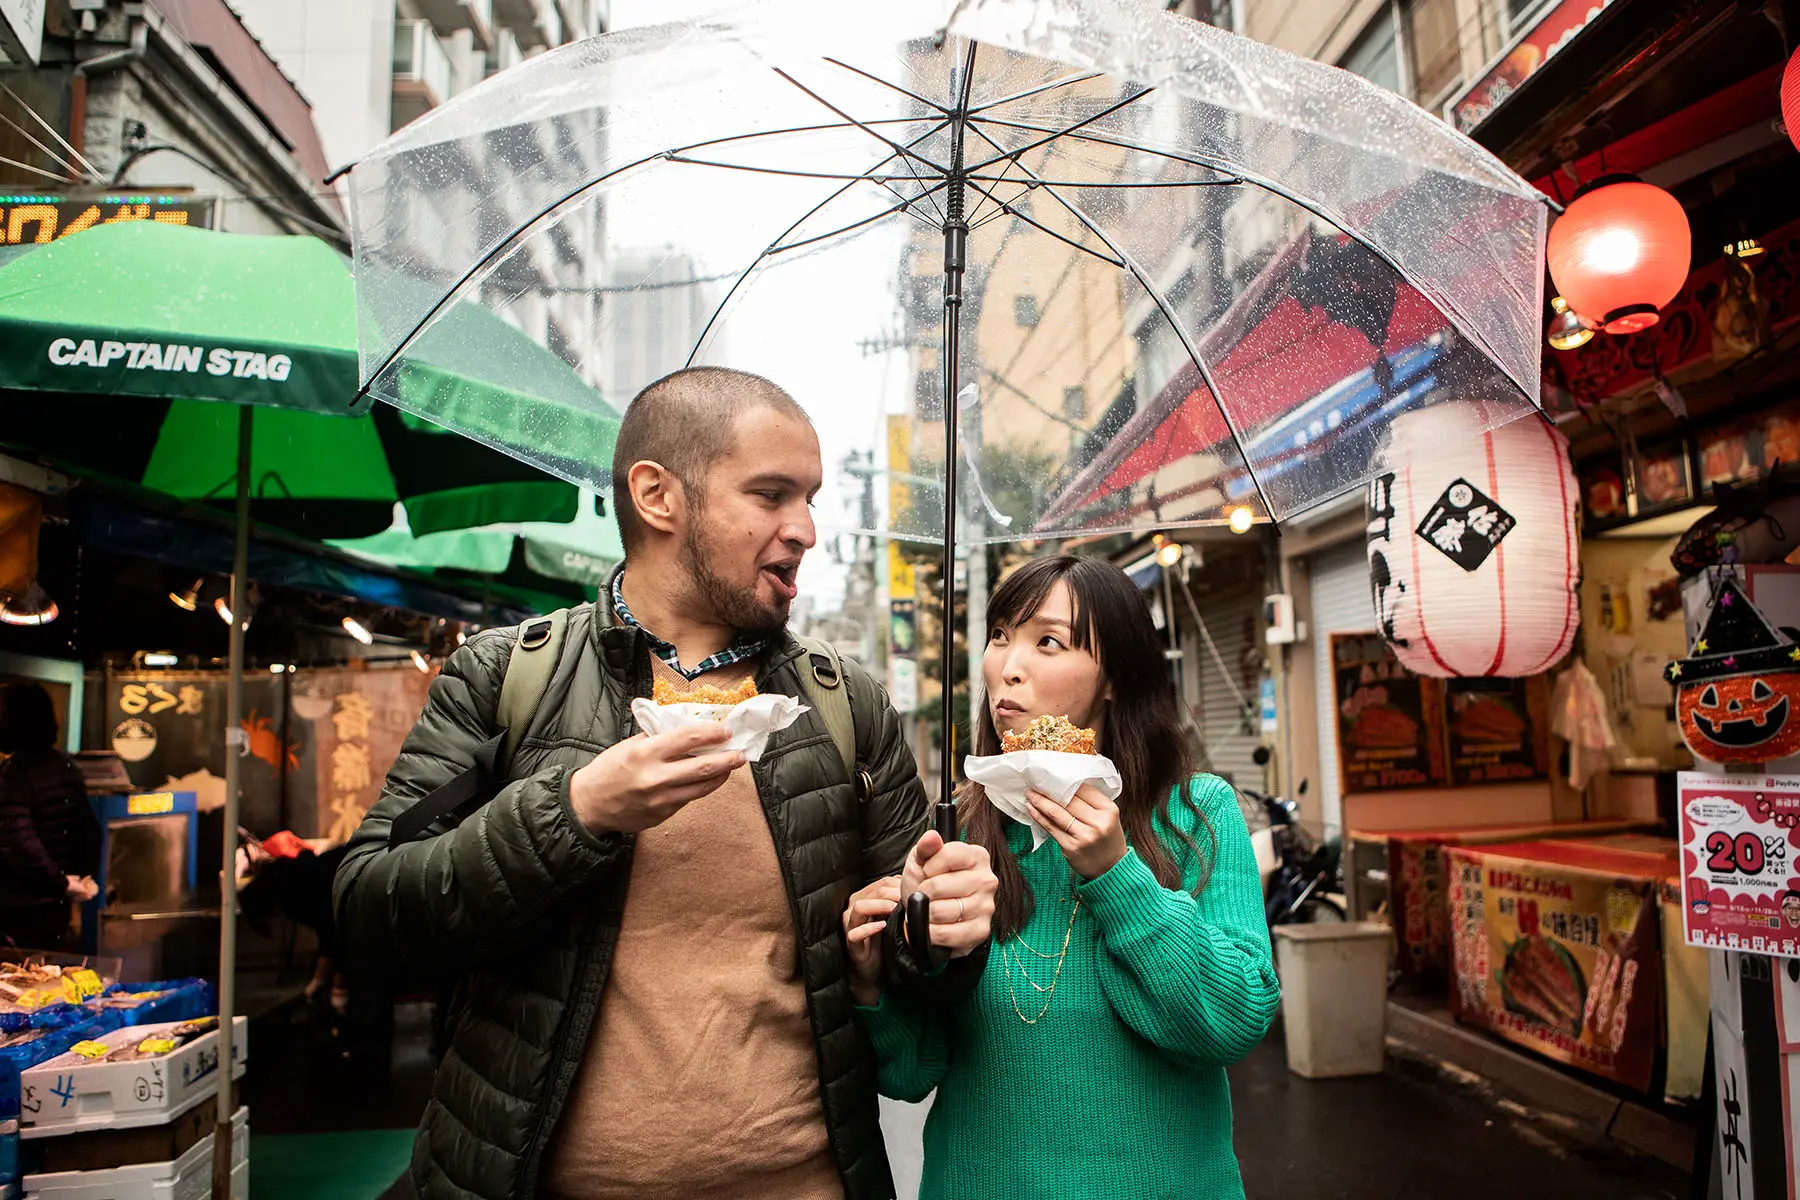 A couple walking in the rain, holding an umbrella, and eating street food in Tokyo, Japan.